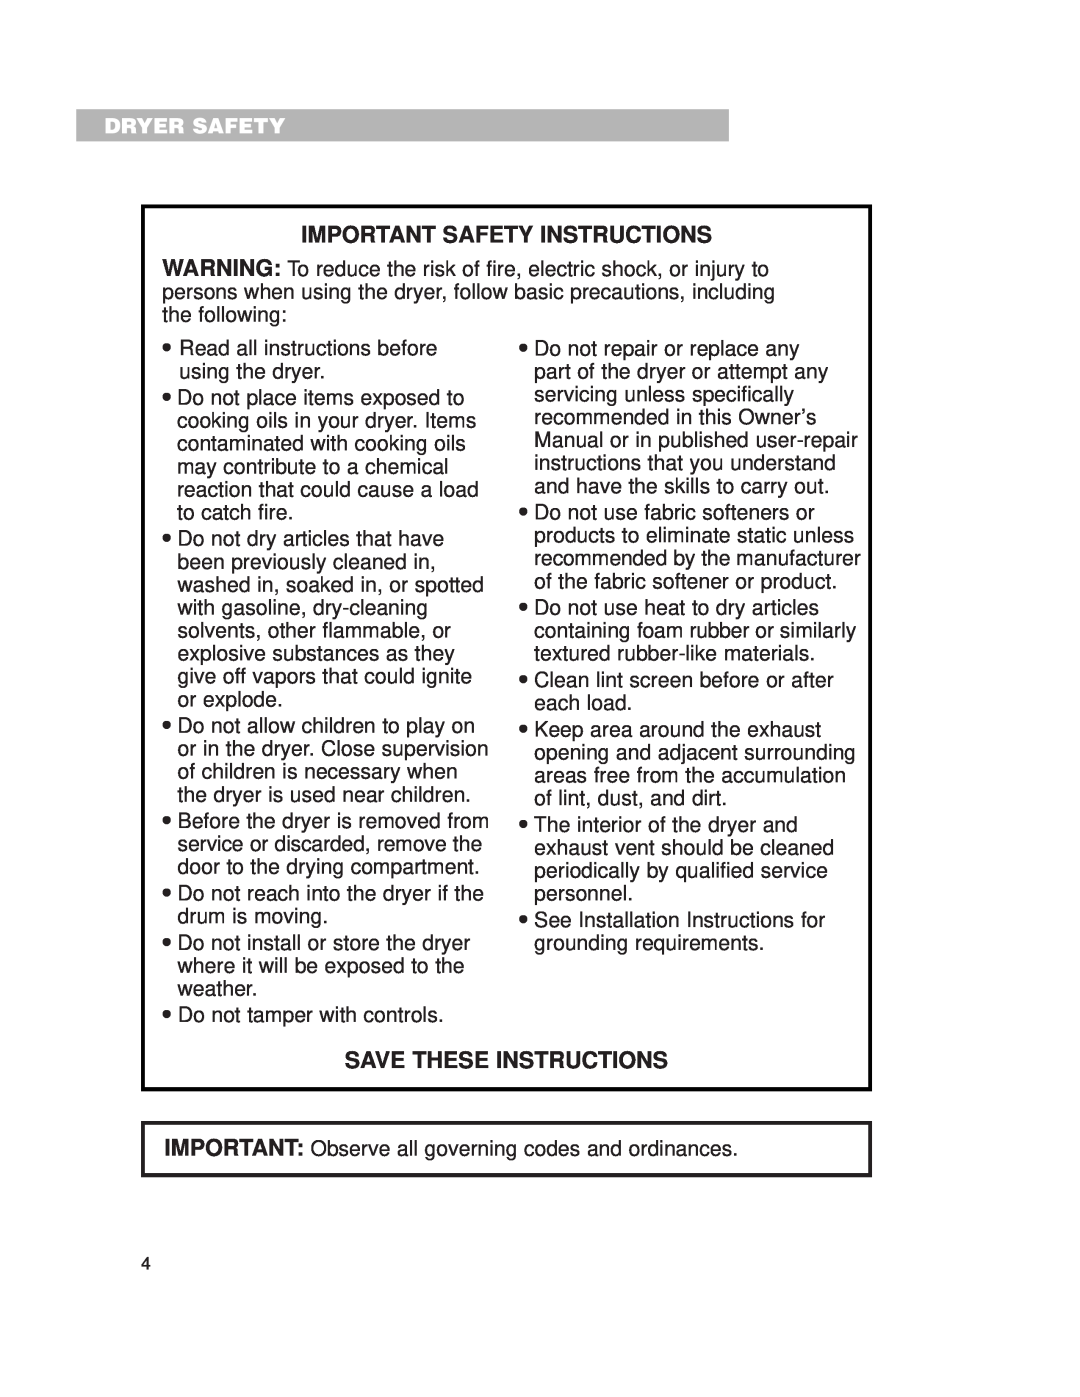 Whirlpool 3977631 installation instructions Important Safety Instructions, Save These Instructions, Dryer Safety 